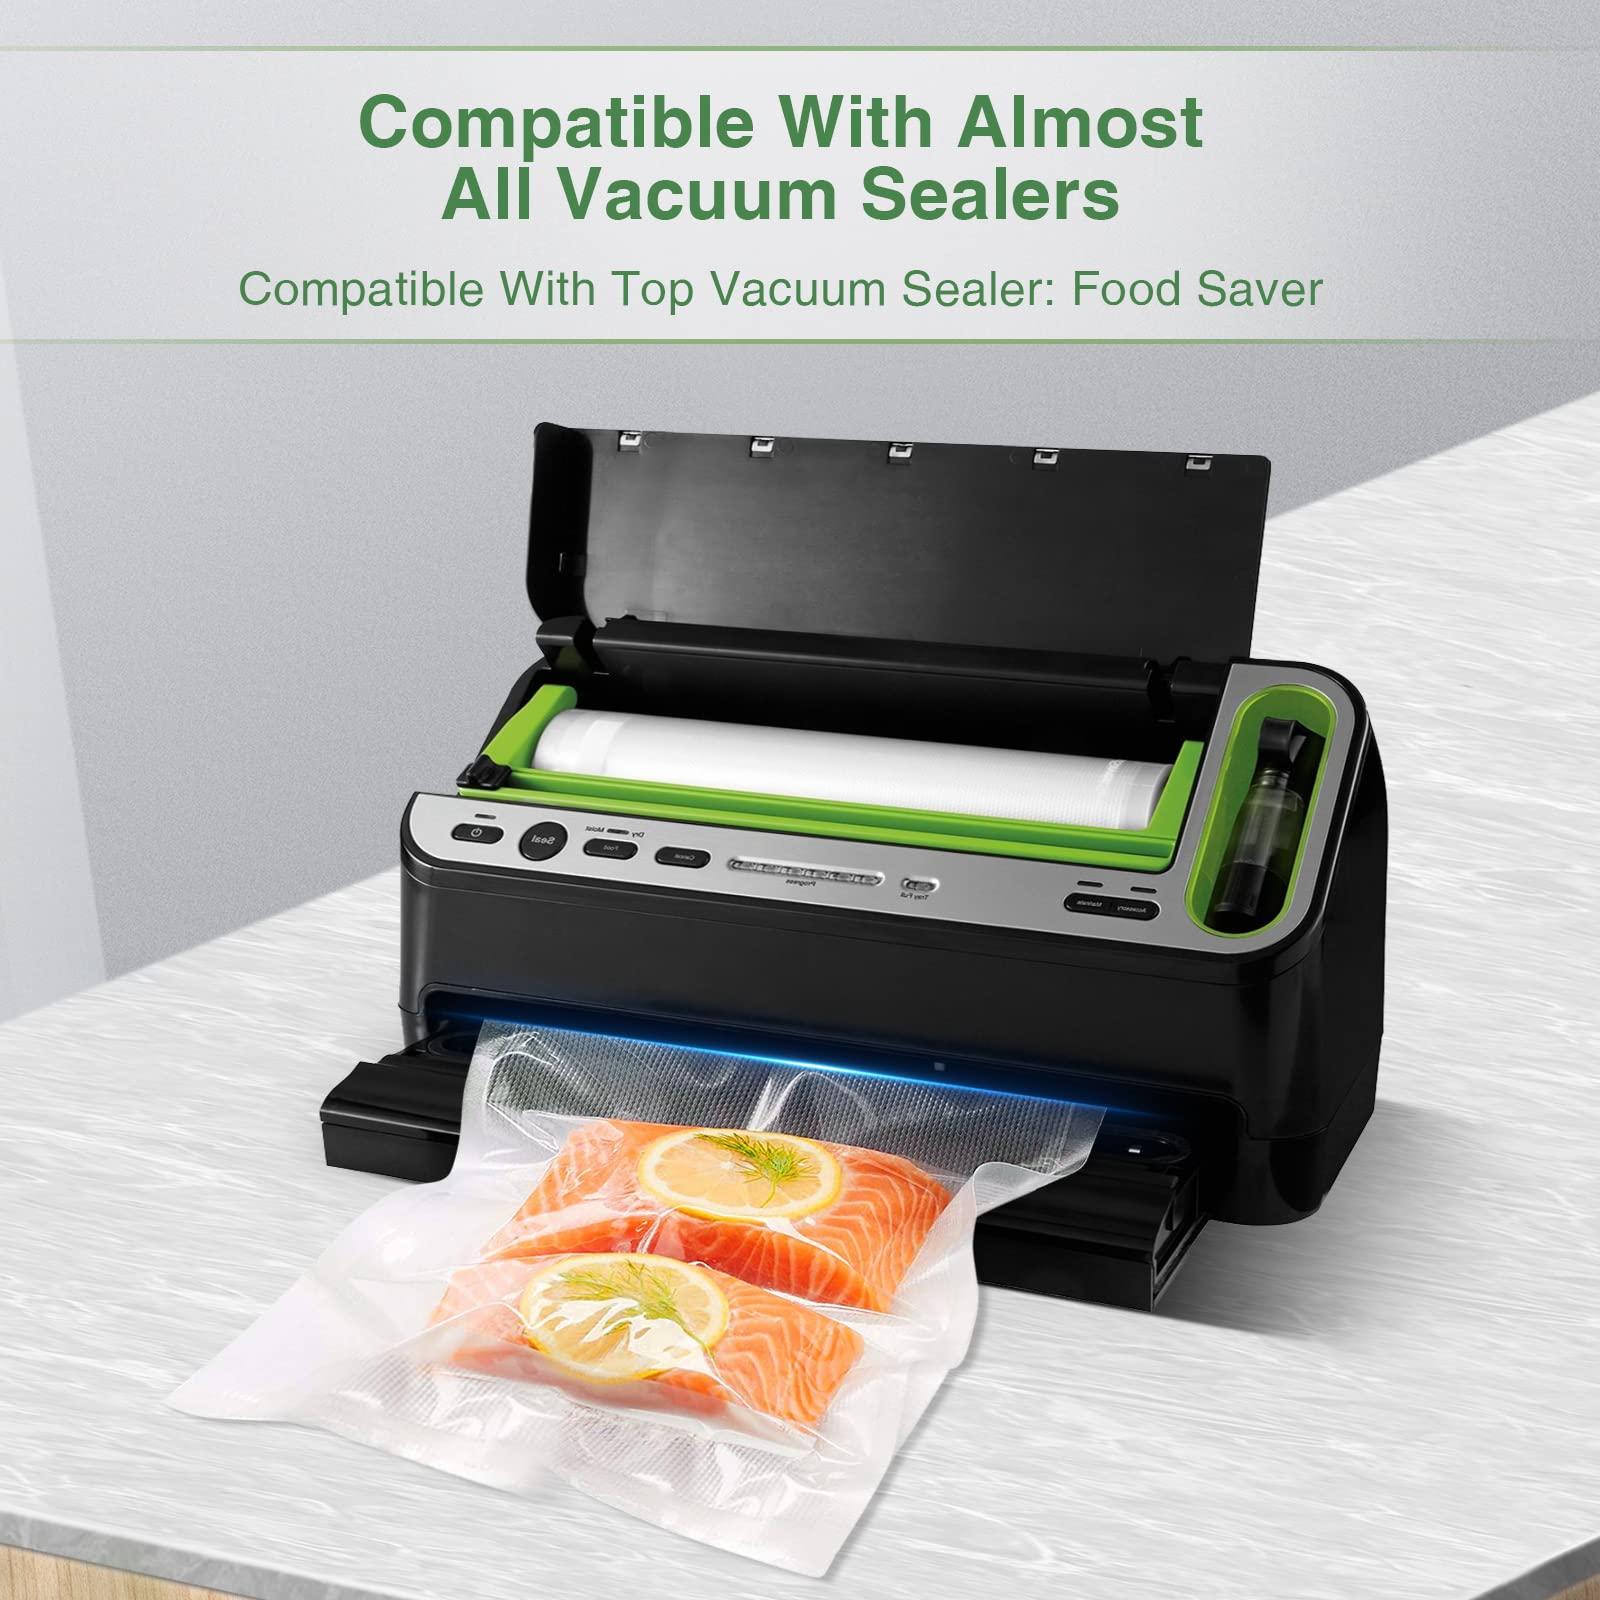 Vtuuu Vacuum Sealer Bags 3 Pack (6", 8", 11") x 25 ft Each Food-Safe Compatible with Most Vacuum Sealers